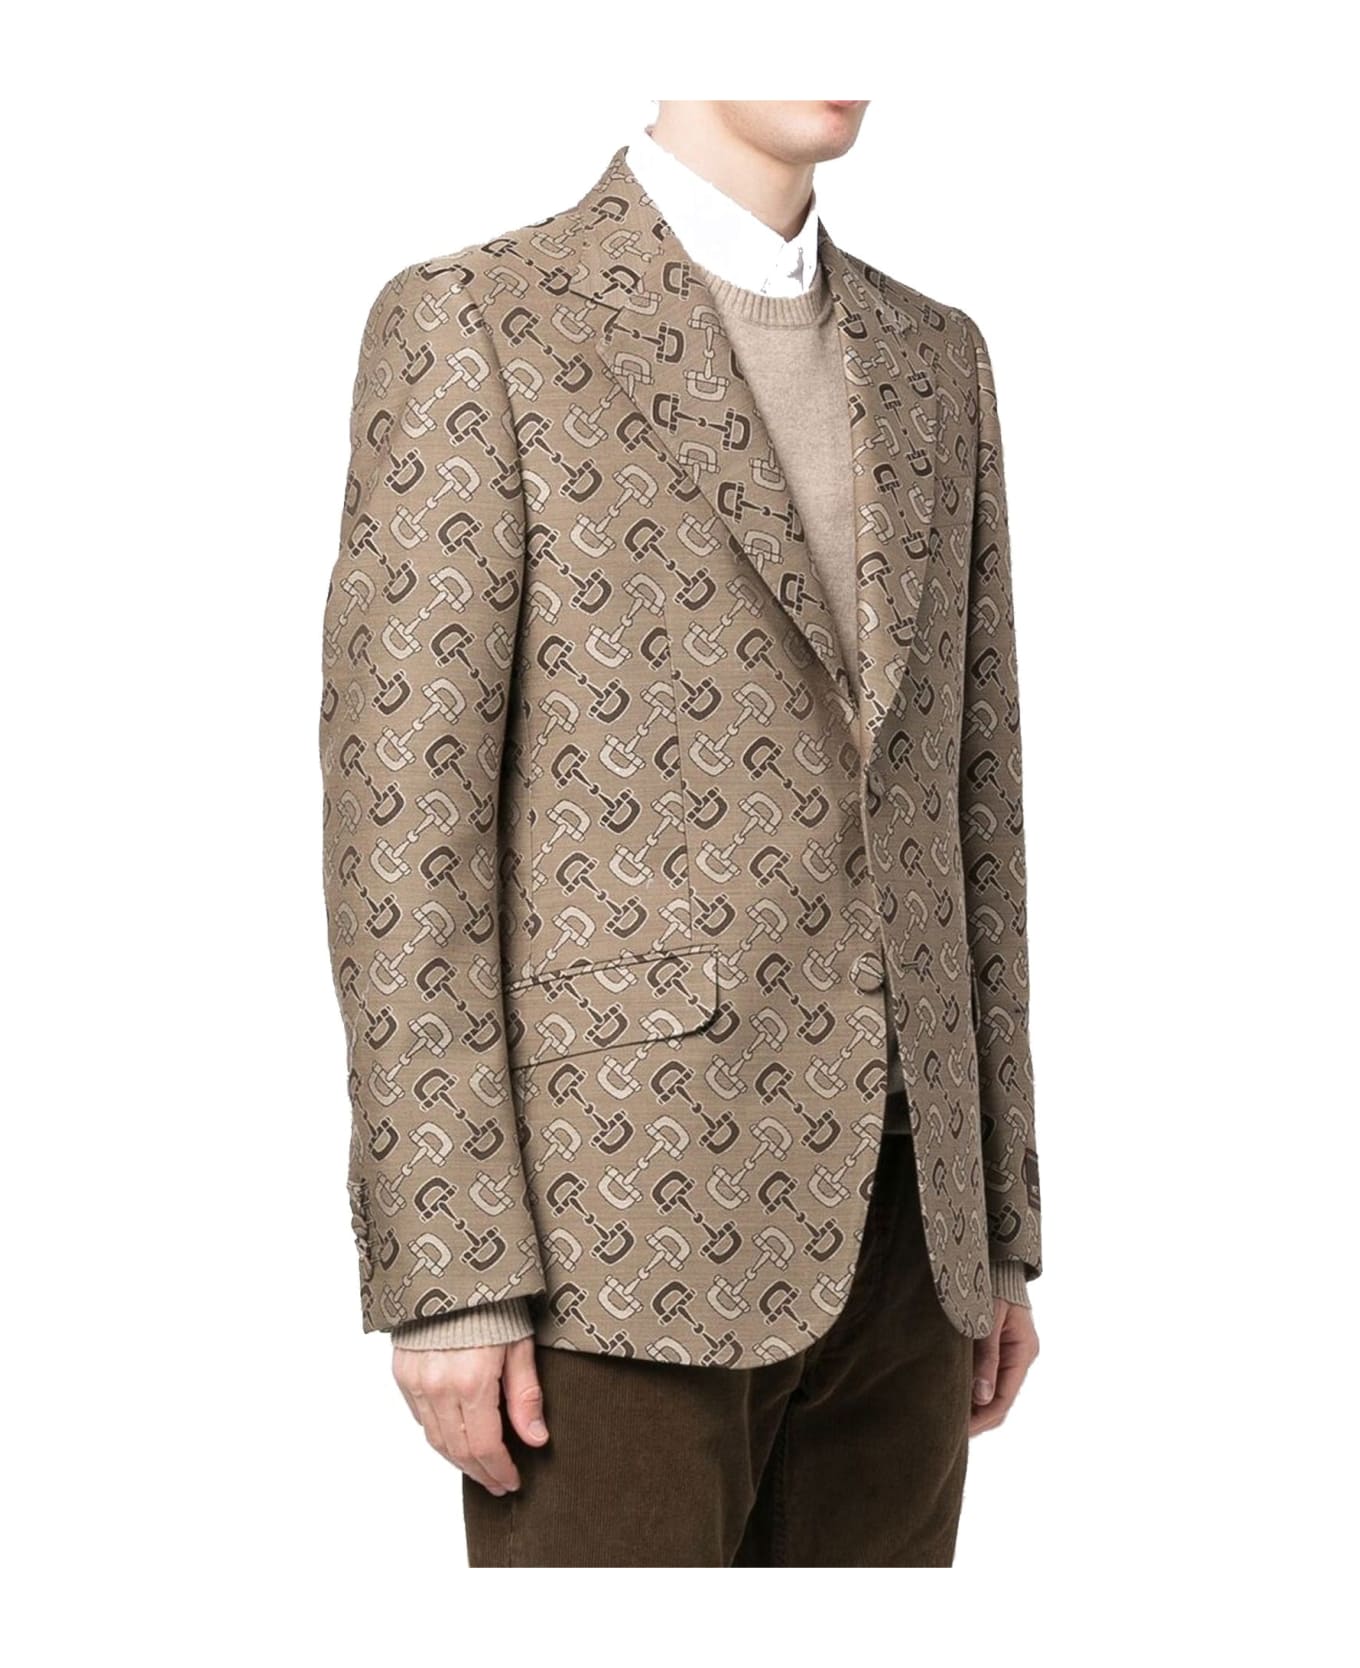 Gucci Cotton And Wool Jacket - Beige ブレザー